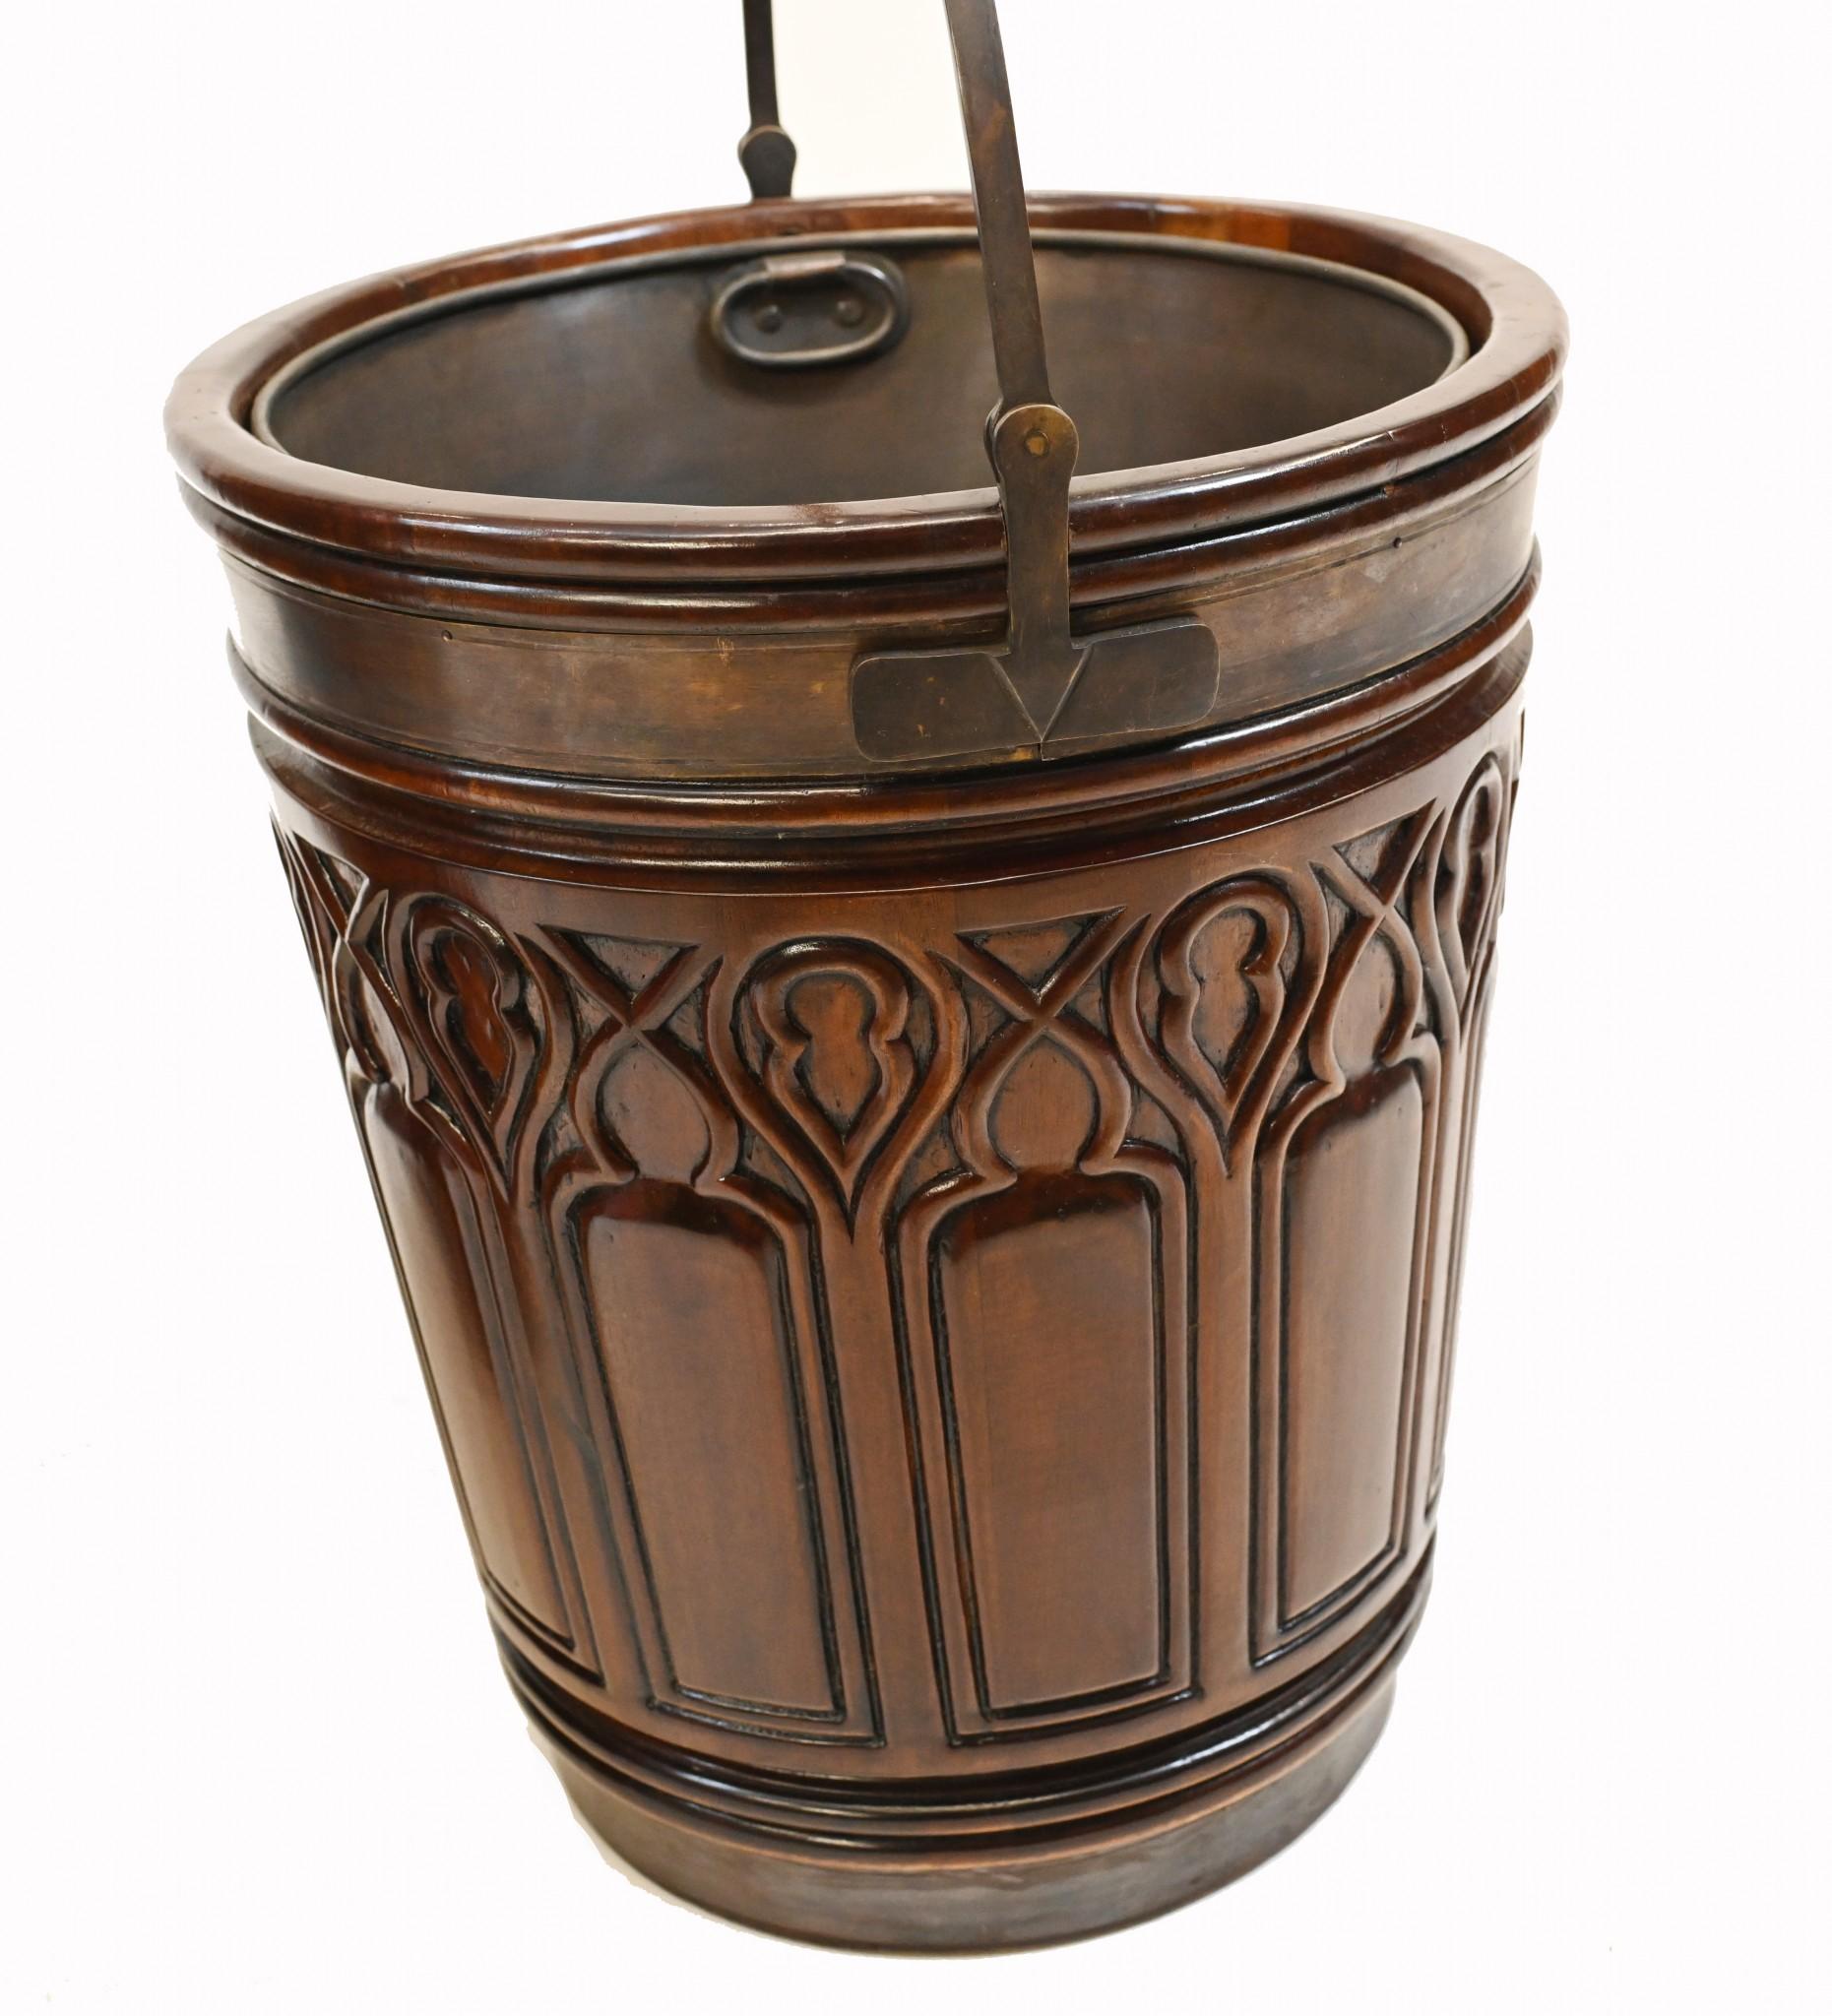 Elegant pair of Irish peat buckets with a gothic design
Work well as a pair of decorative planters
Features a copper liner that comes out
Some of our items are in storage so please check ahead of a viewing to see if it is on our shop